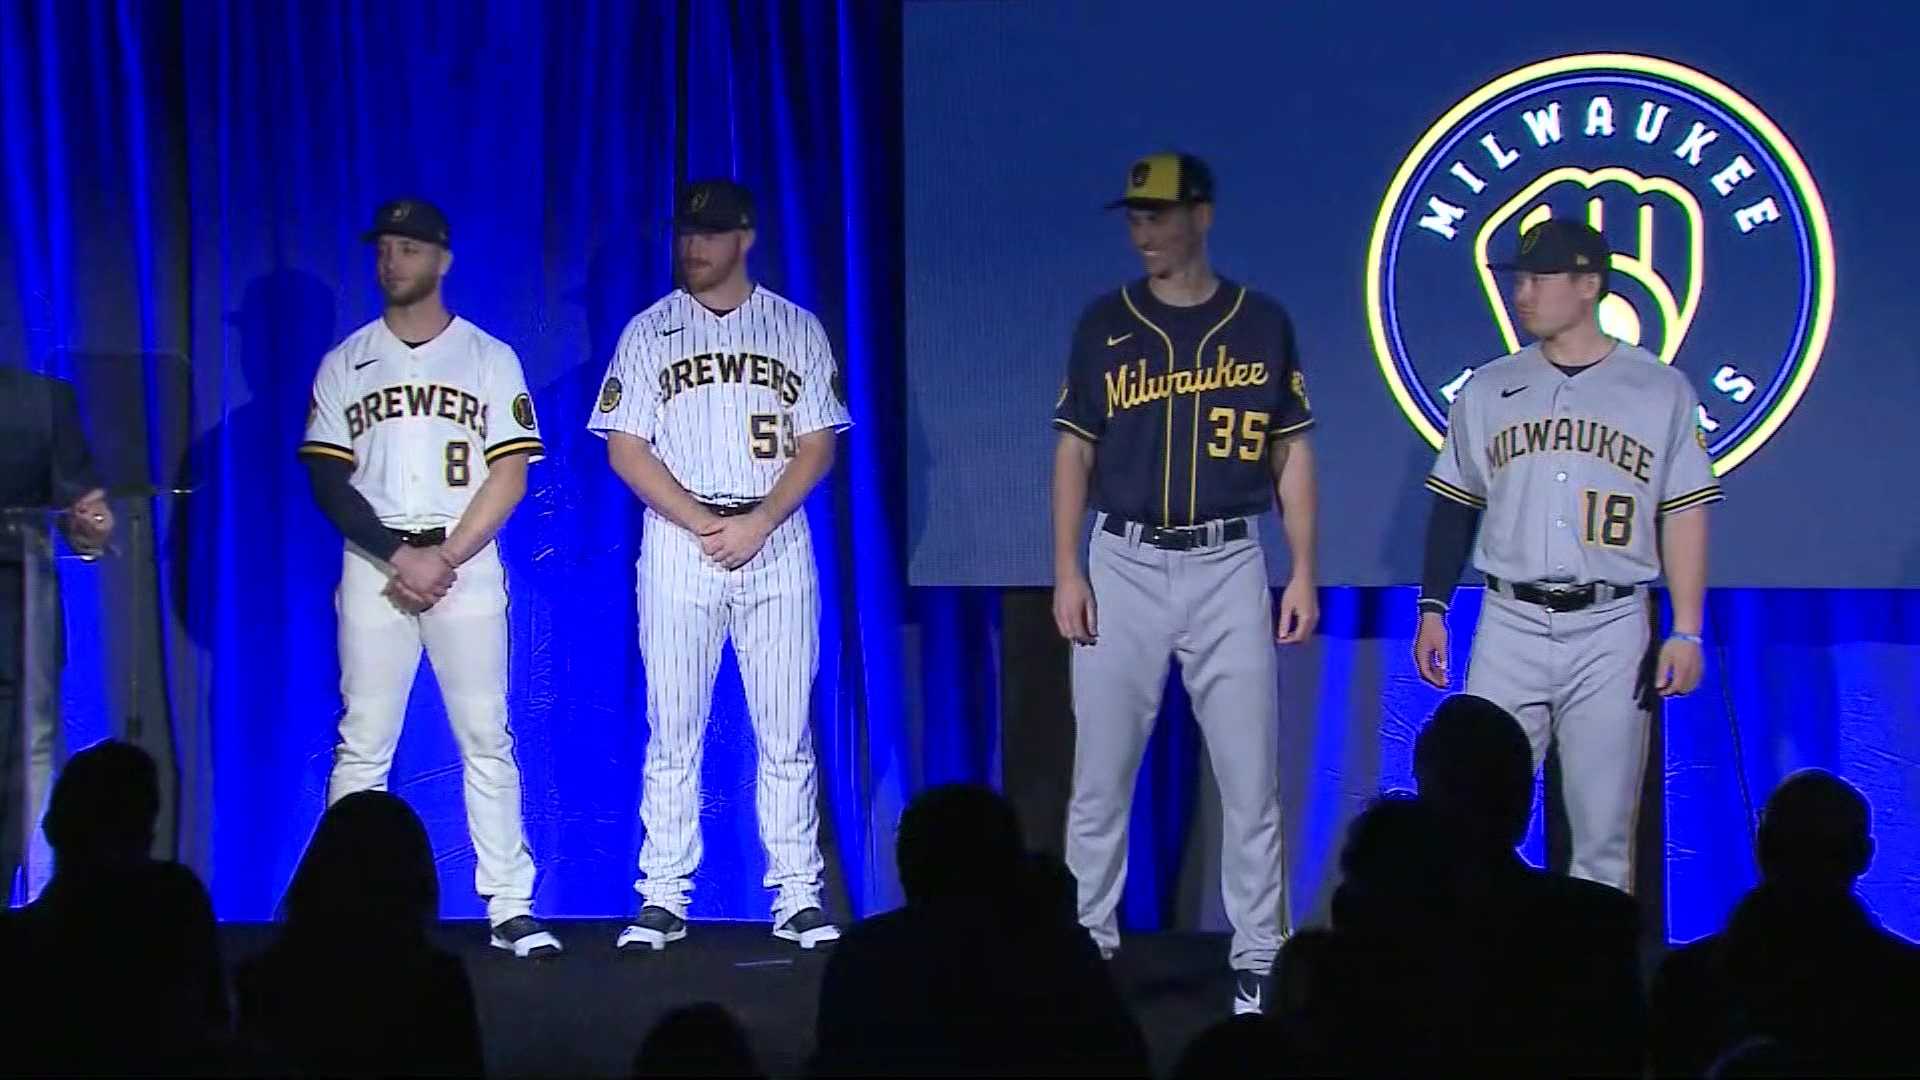 brewers 2022 uniforms